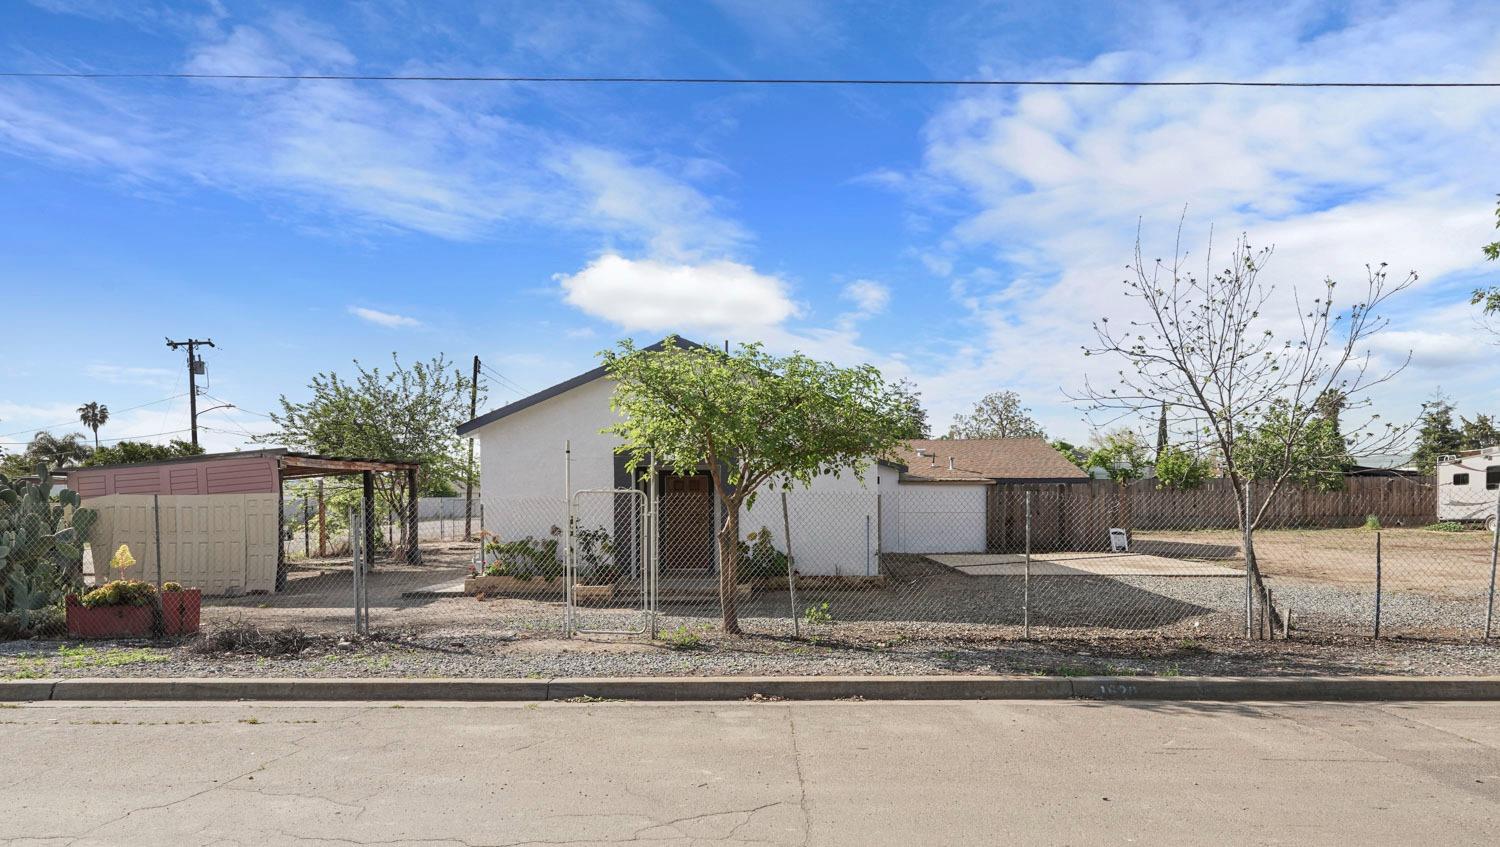 Photo of 1620 Minnie St in Patterson, CA